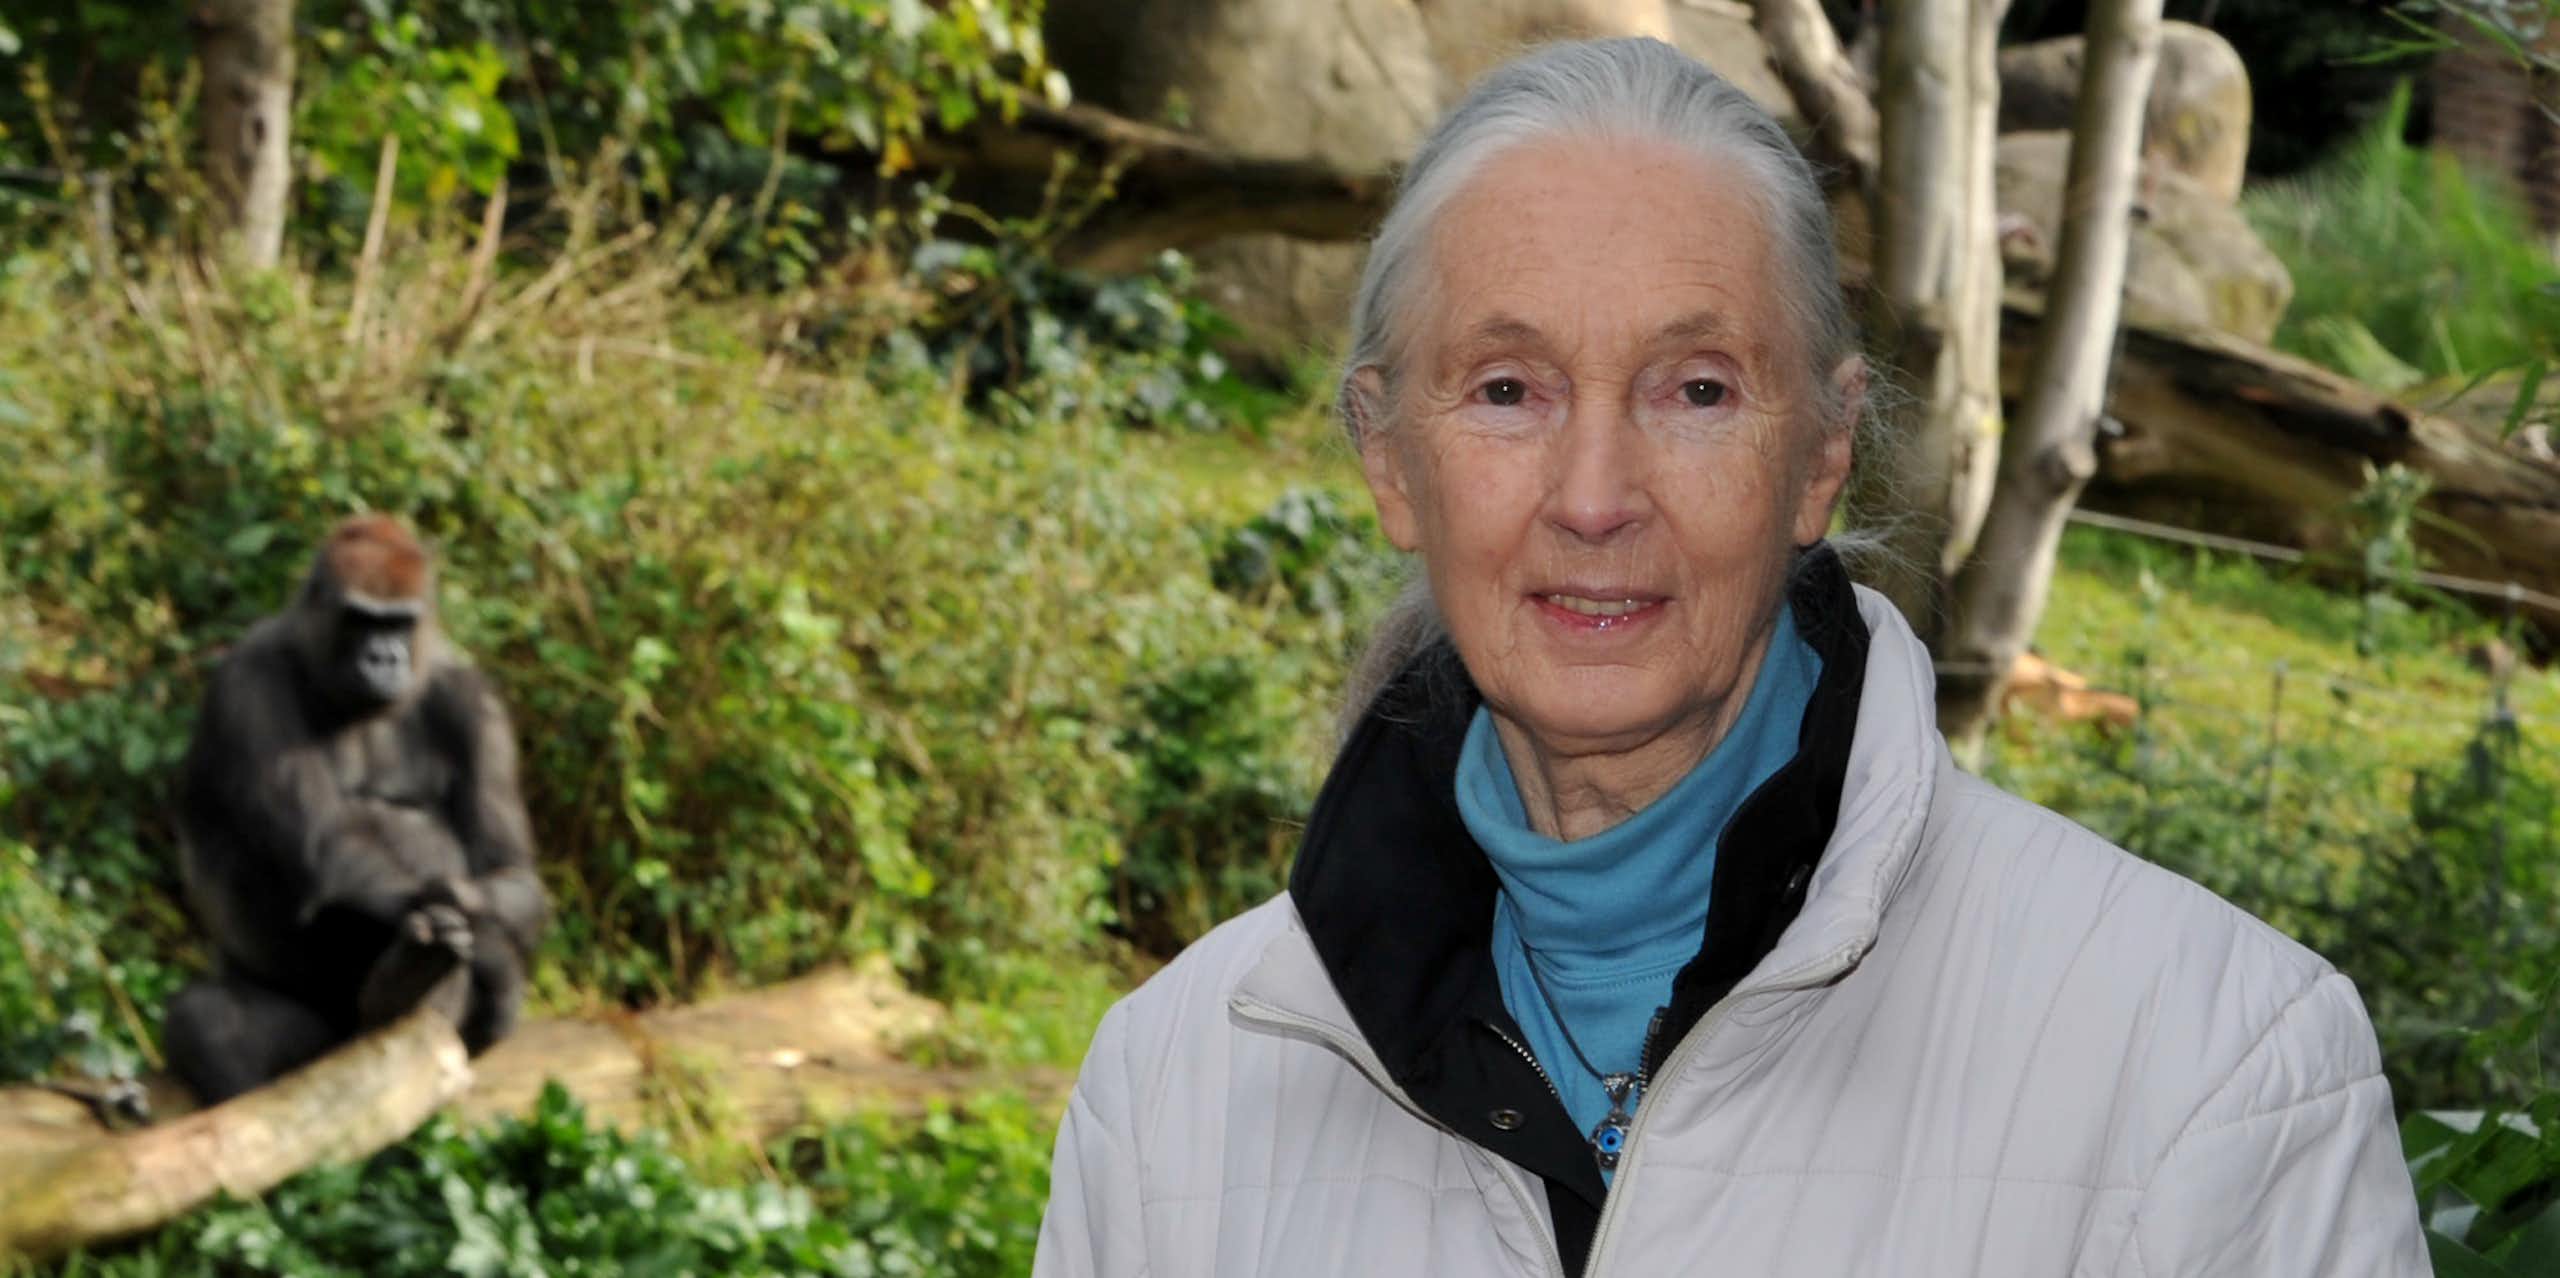 Jane Goodall poses for a photograph in front of the gorilla exhibit at Melbourne Zoo, with a gorilla in the backround